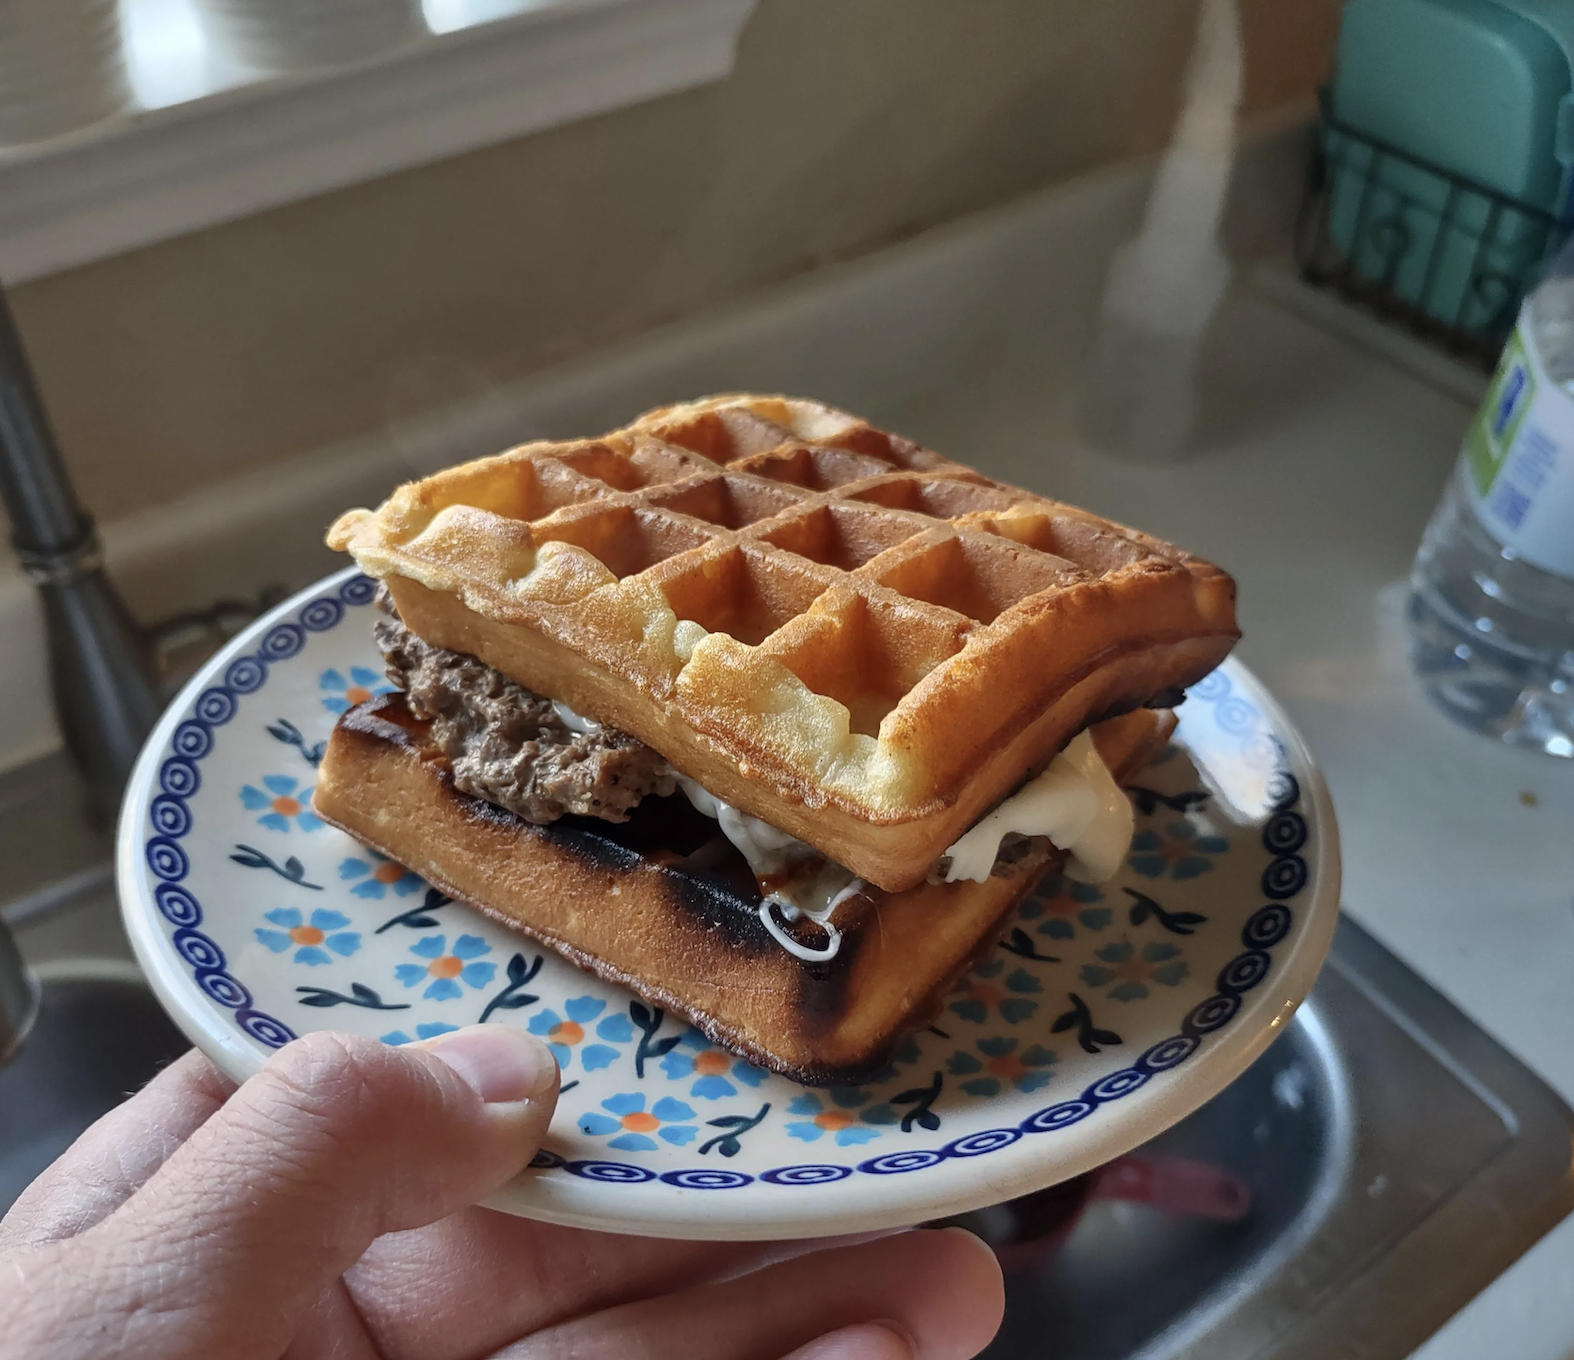 A person holding a plate with a waffle sandwich containing eggs and sausage